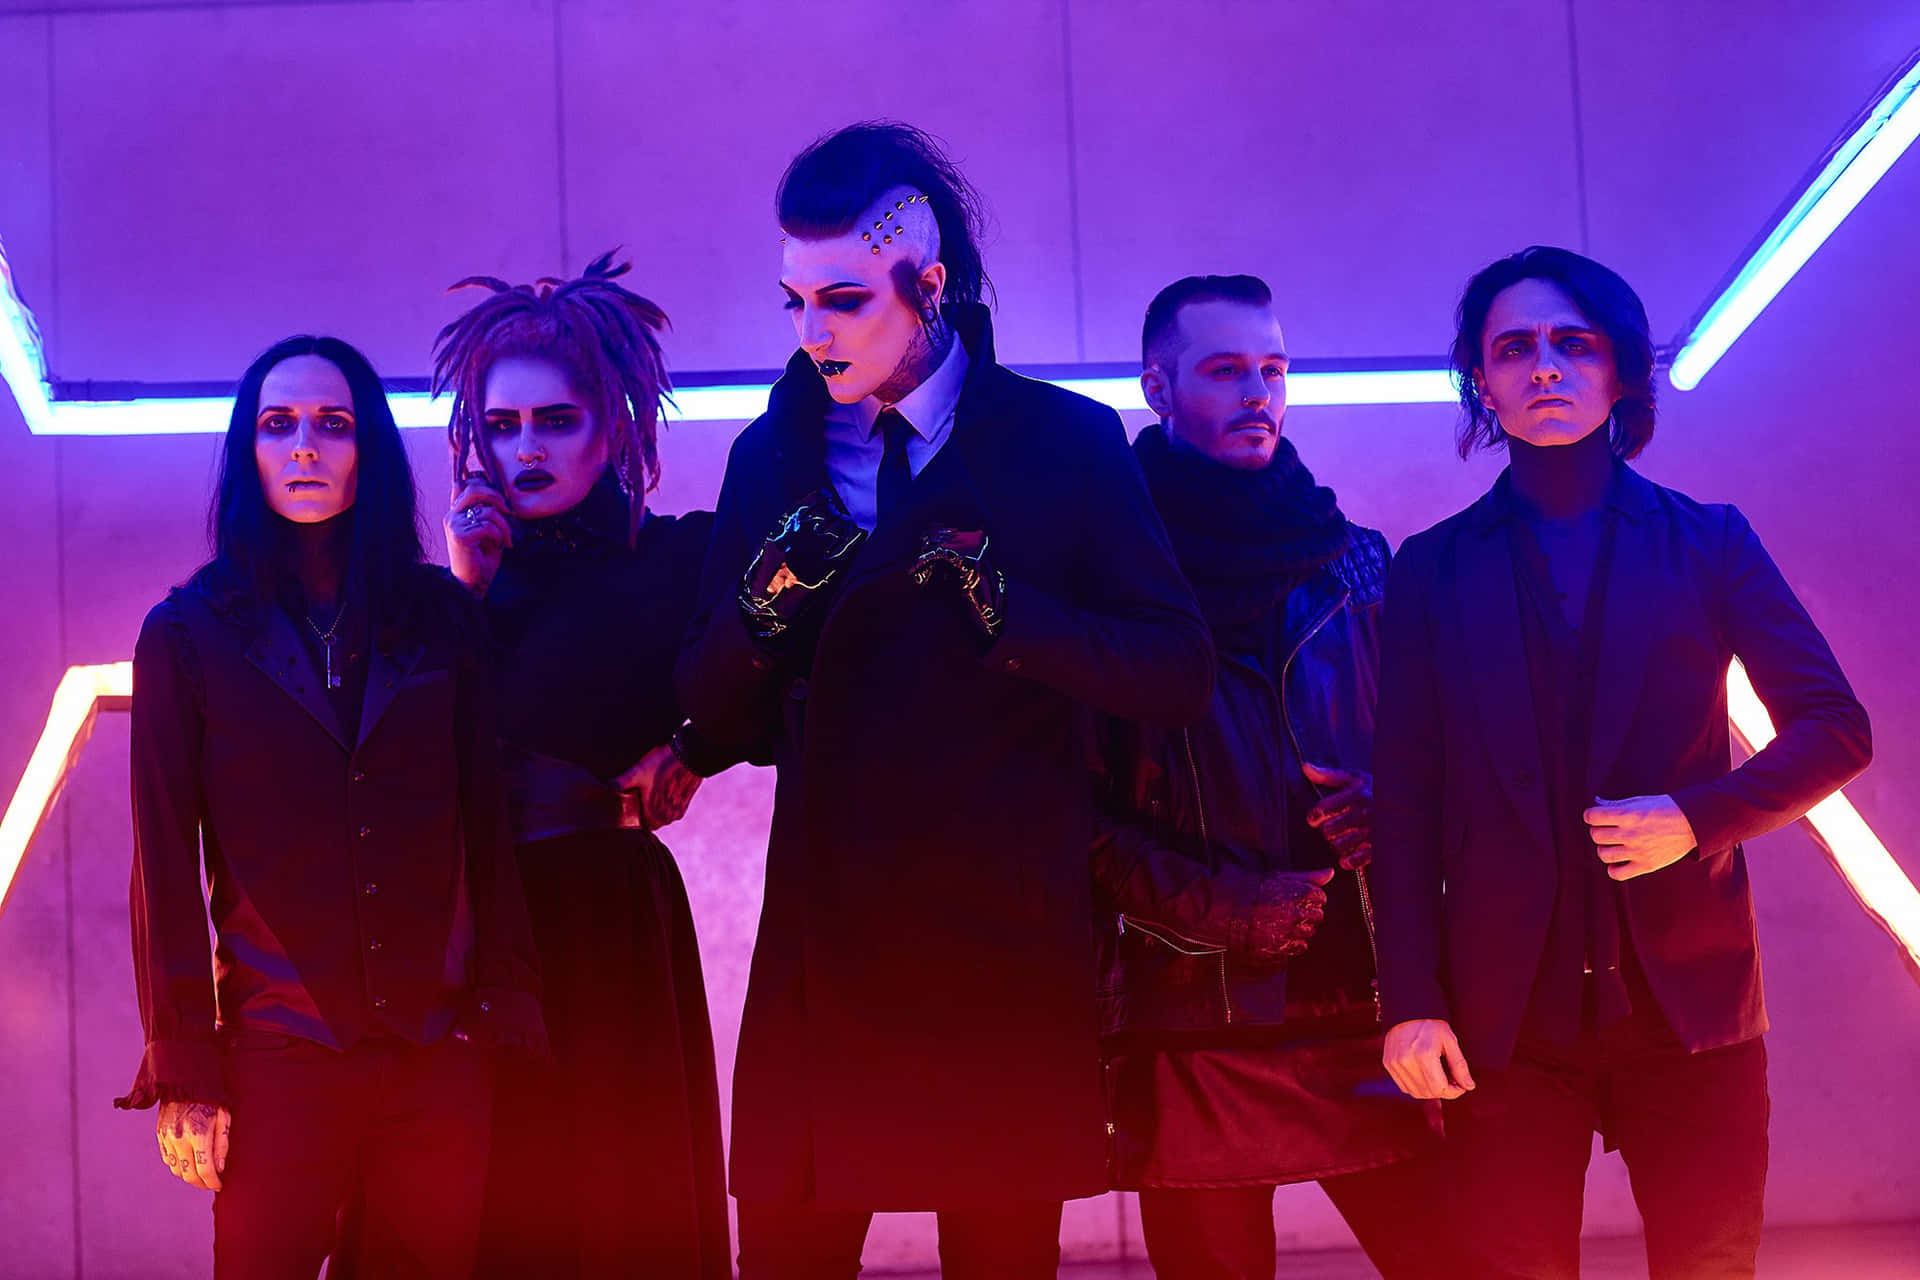 Motionless In White Band Neon Backdrop